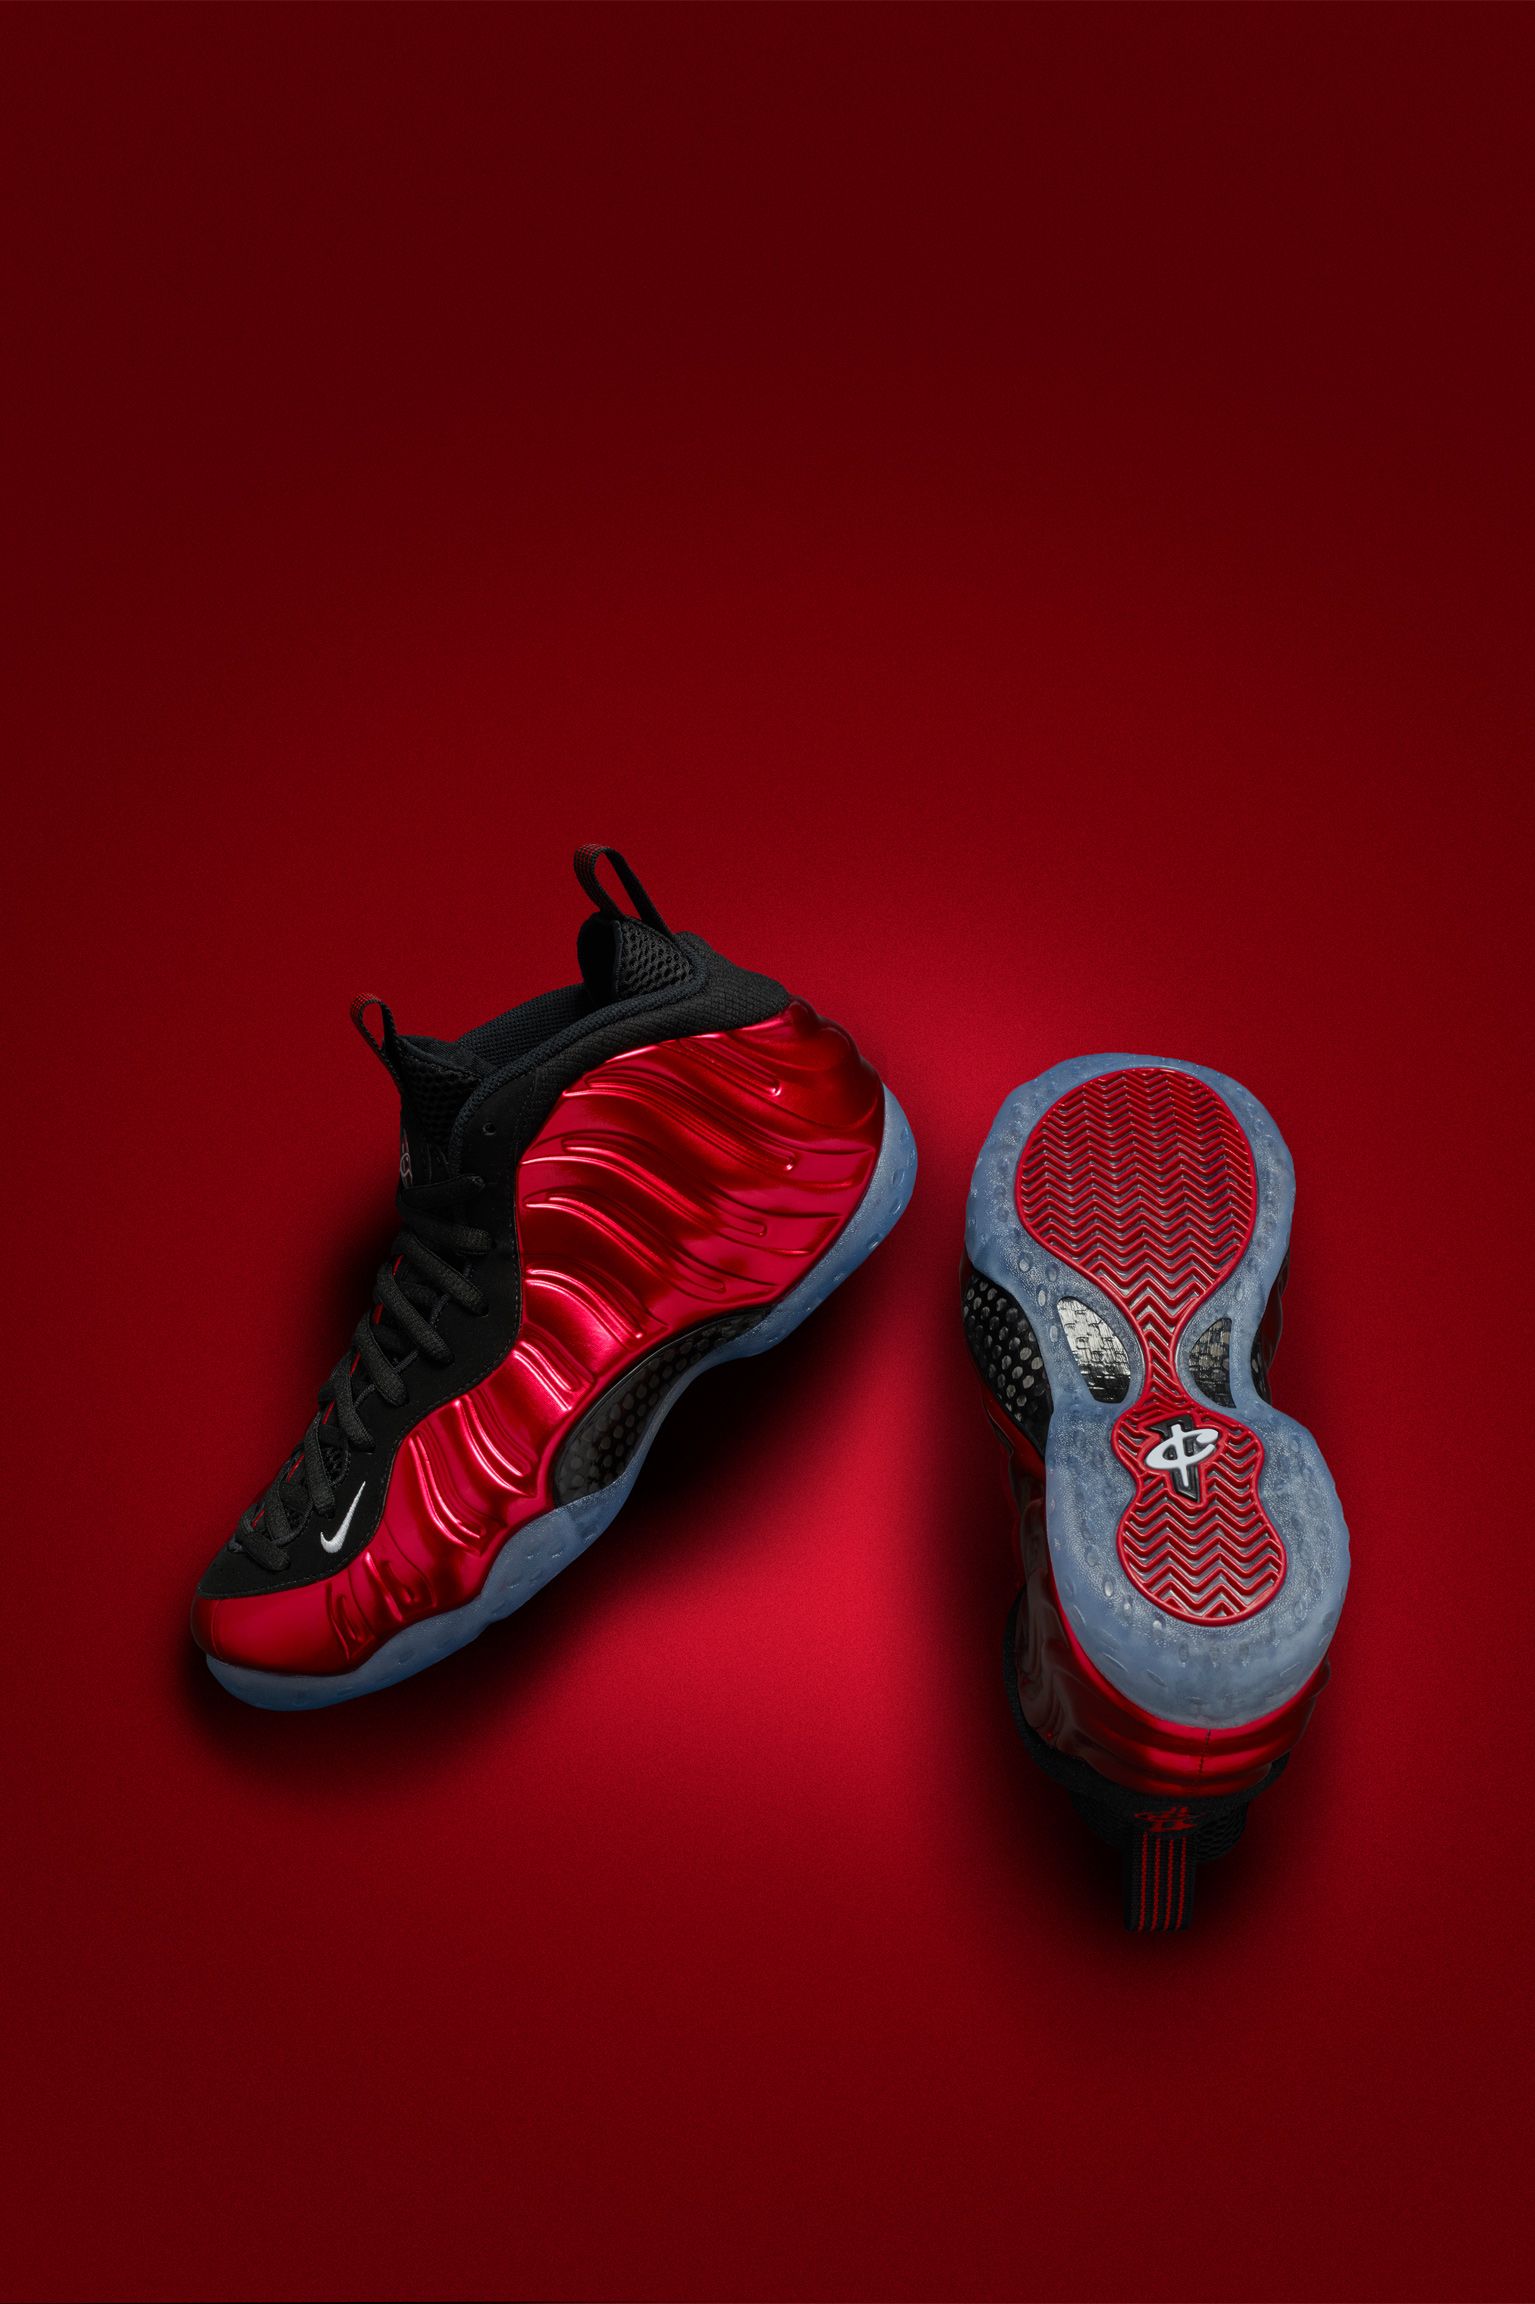 new red foamposites